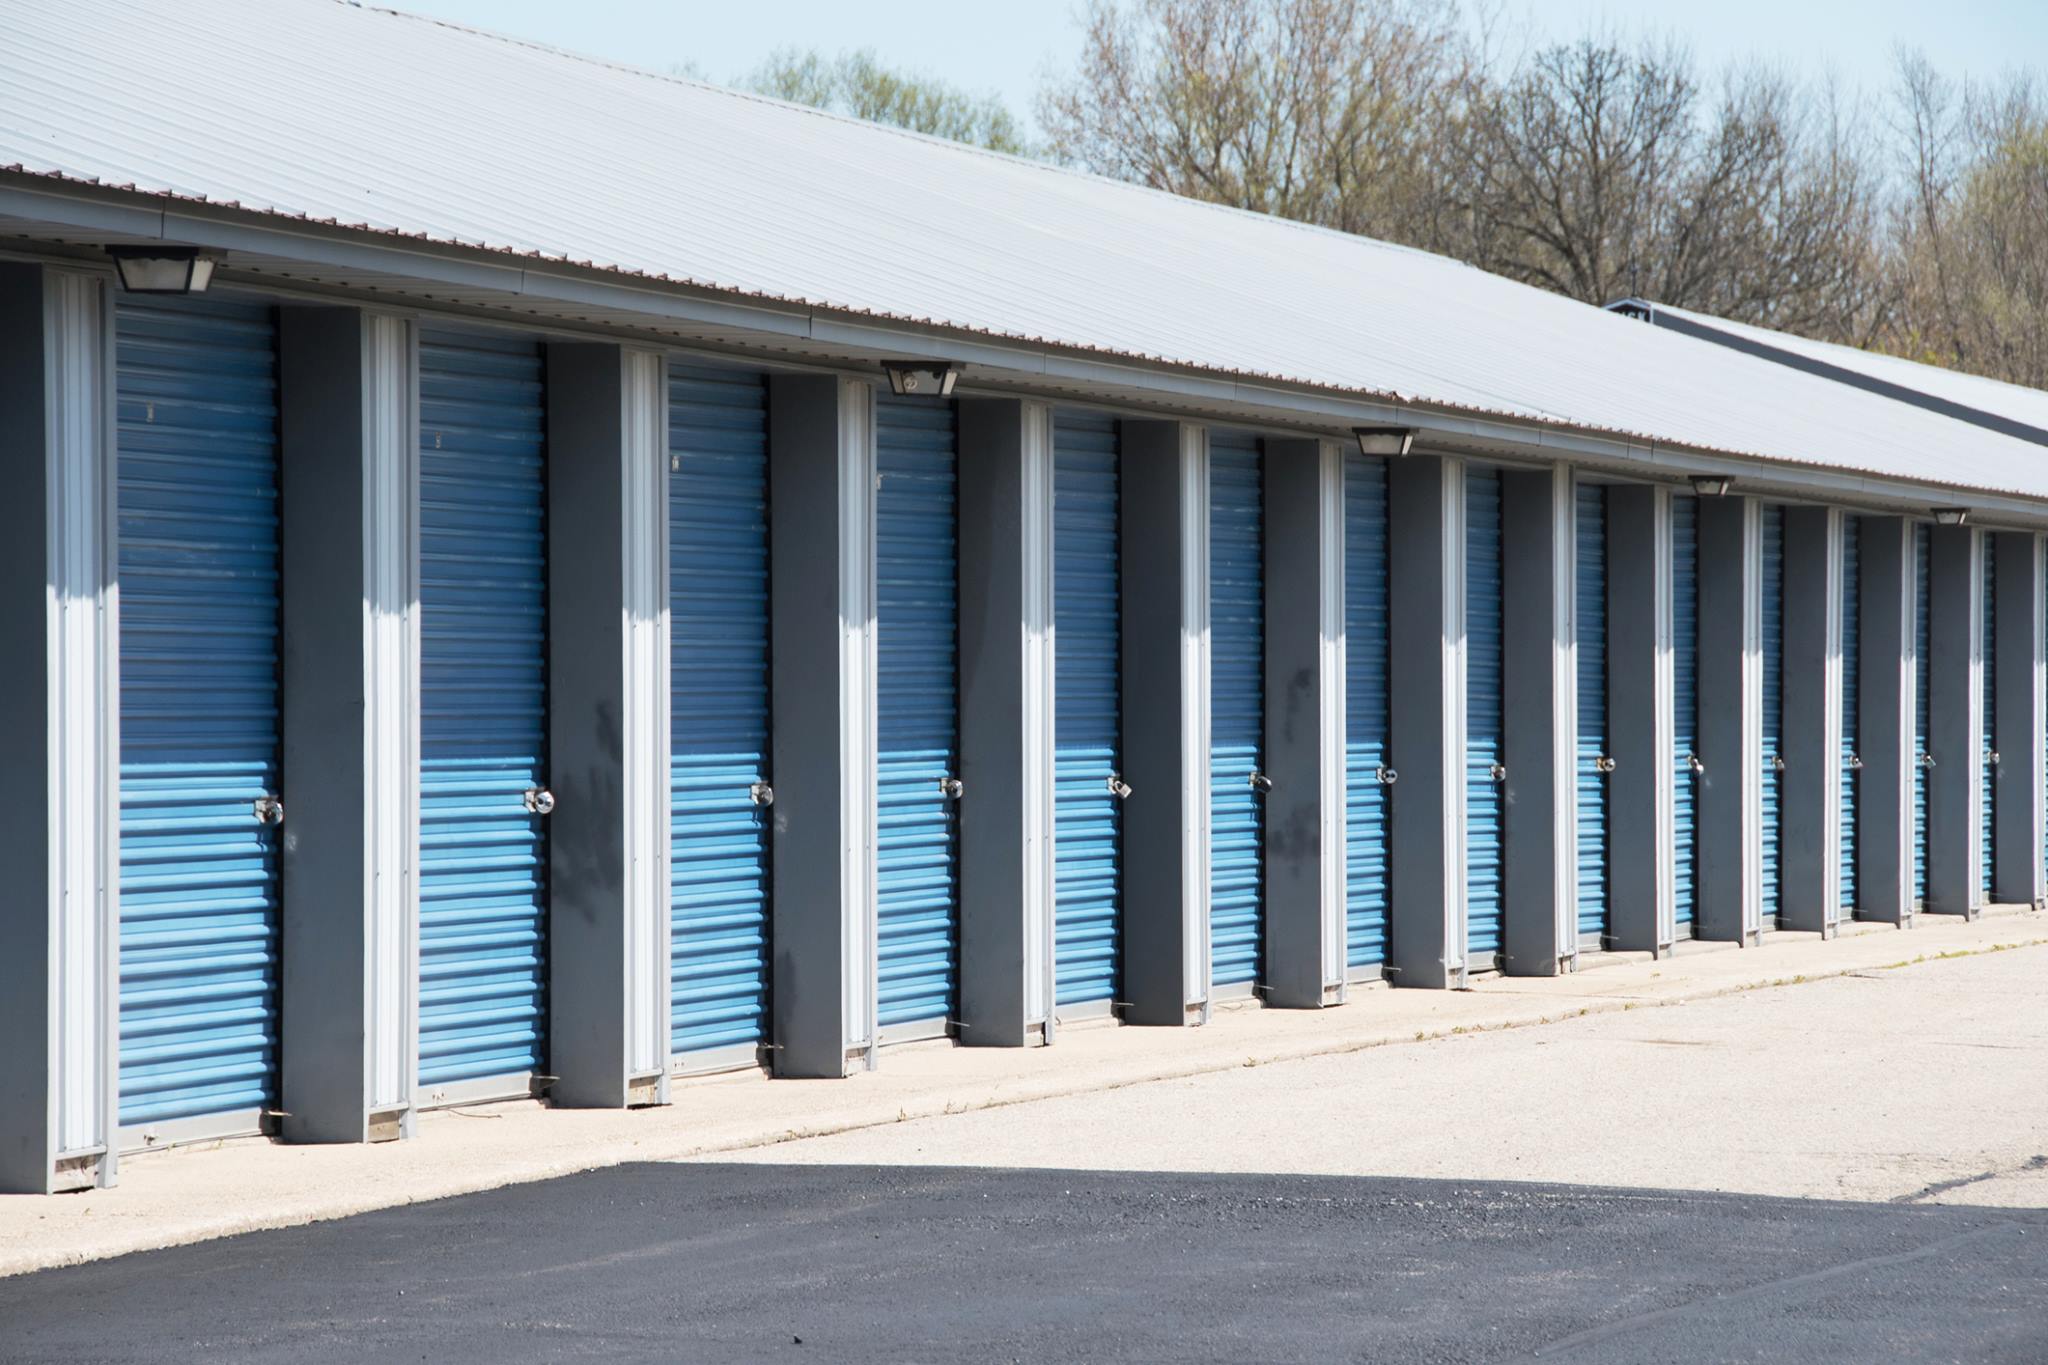 Exterior view of the lined up storage units